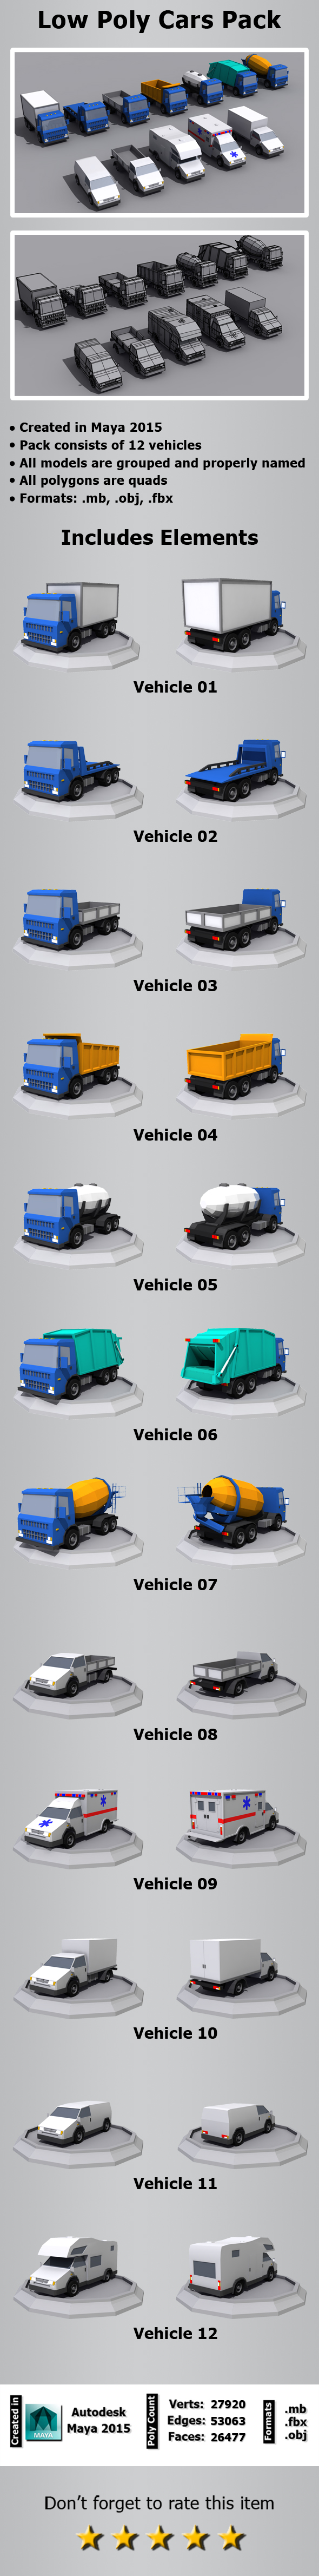 Low Poly Cars - 3Docean 22974621